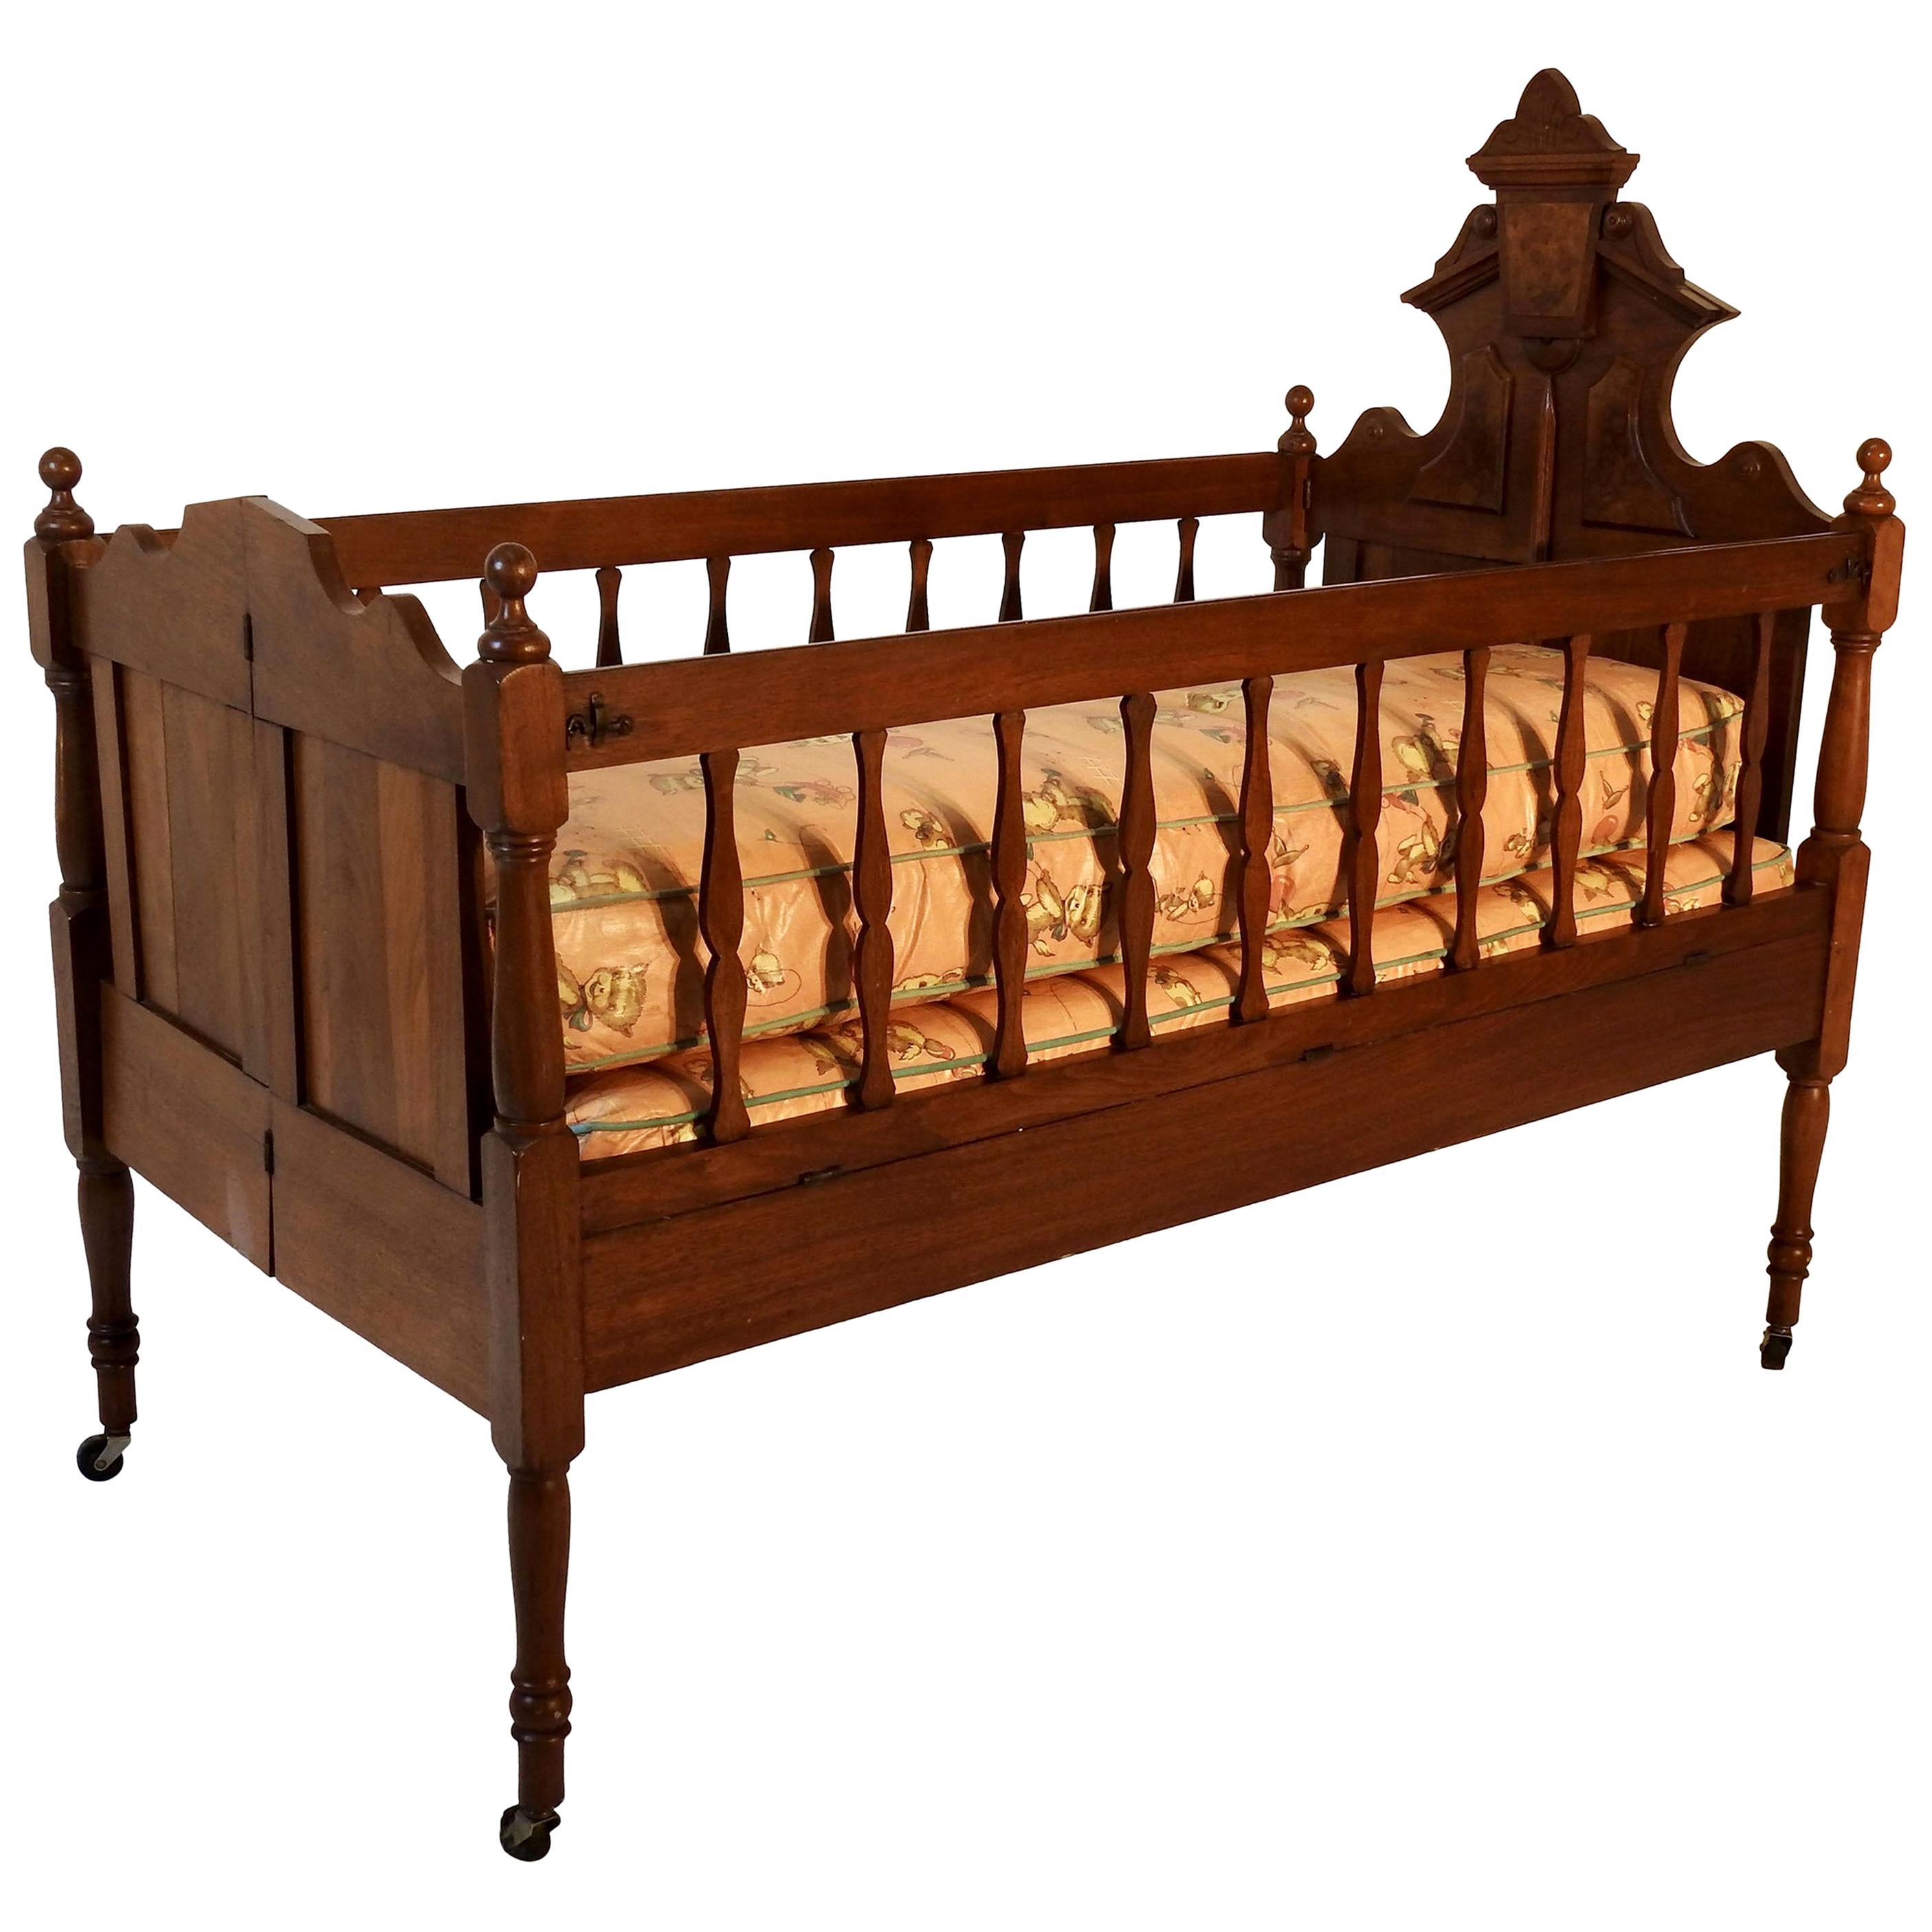 Victorian Childs Bed For Sale